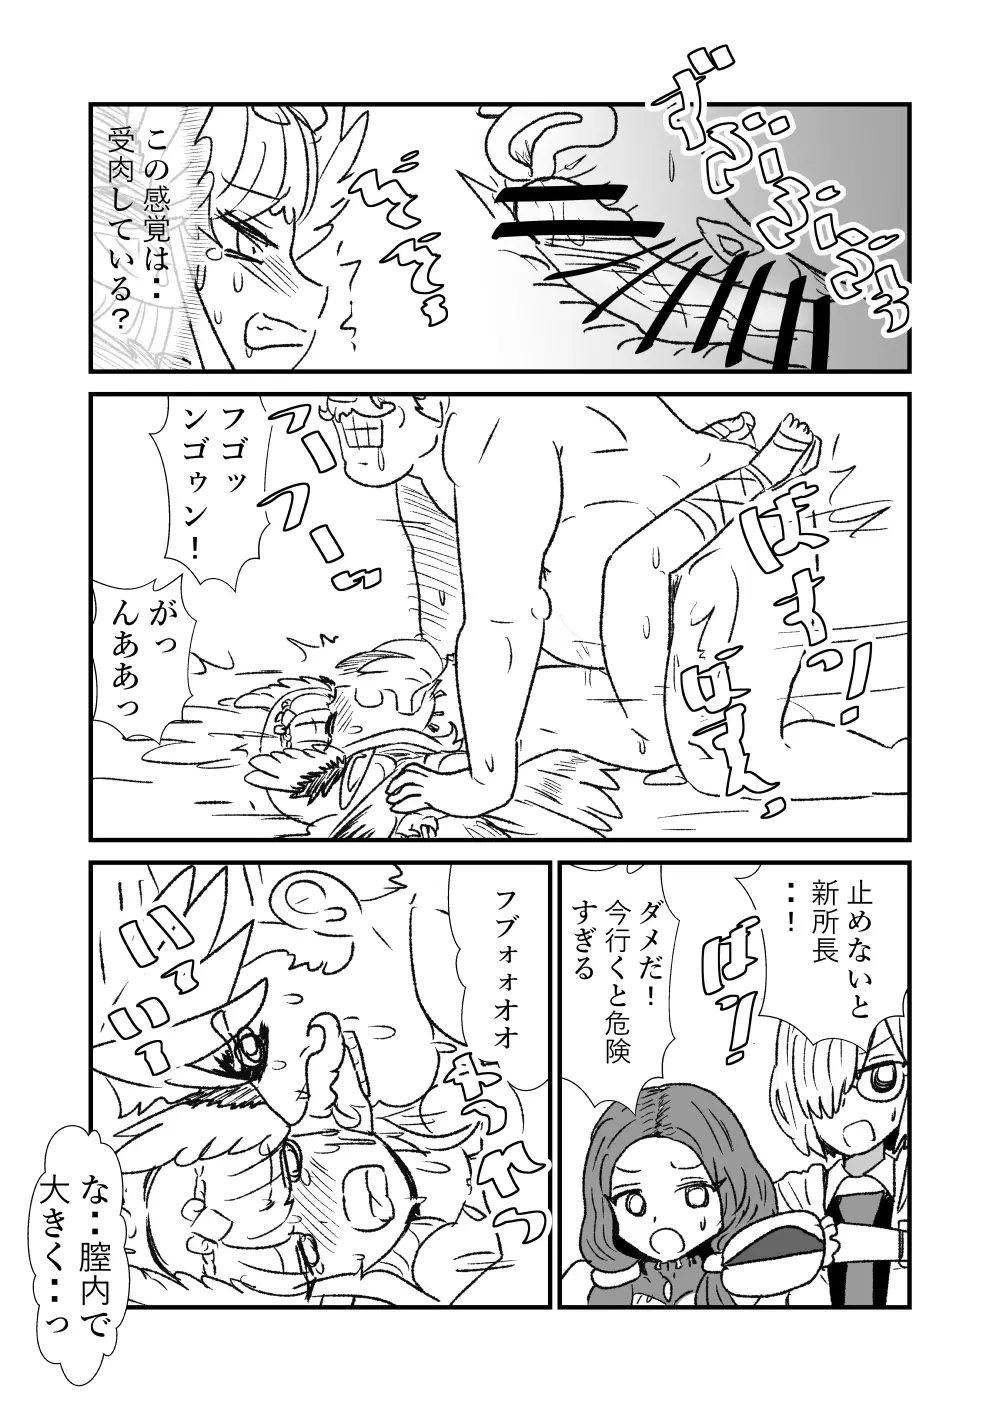 FPO~桃色林檎の種付け周回～ - page6